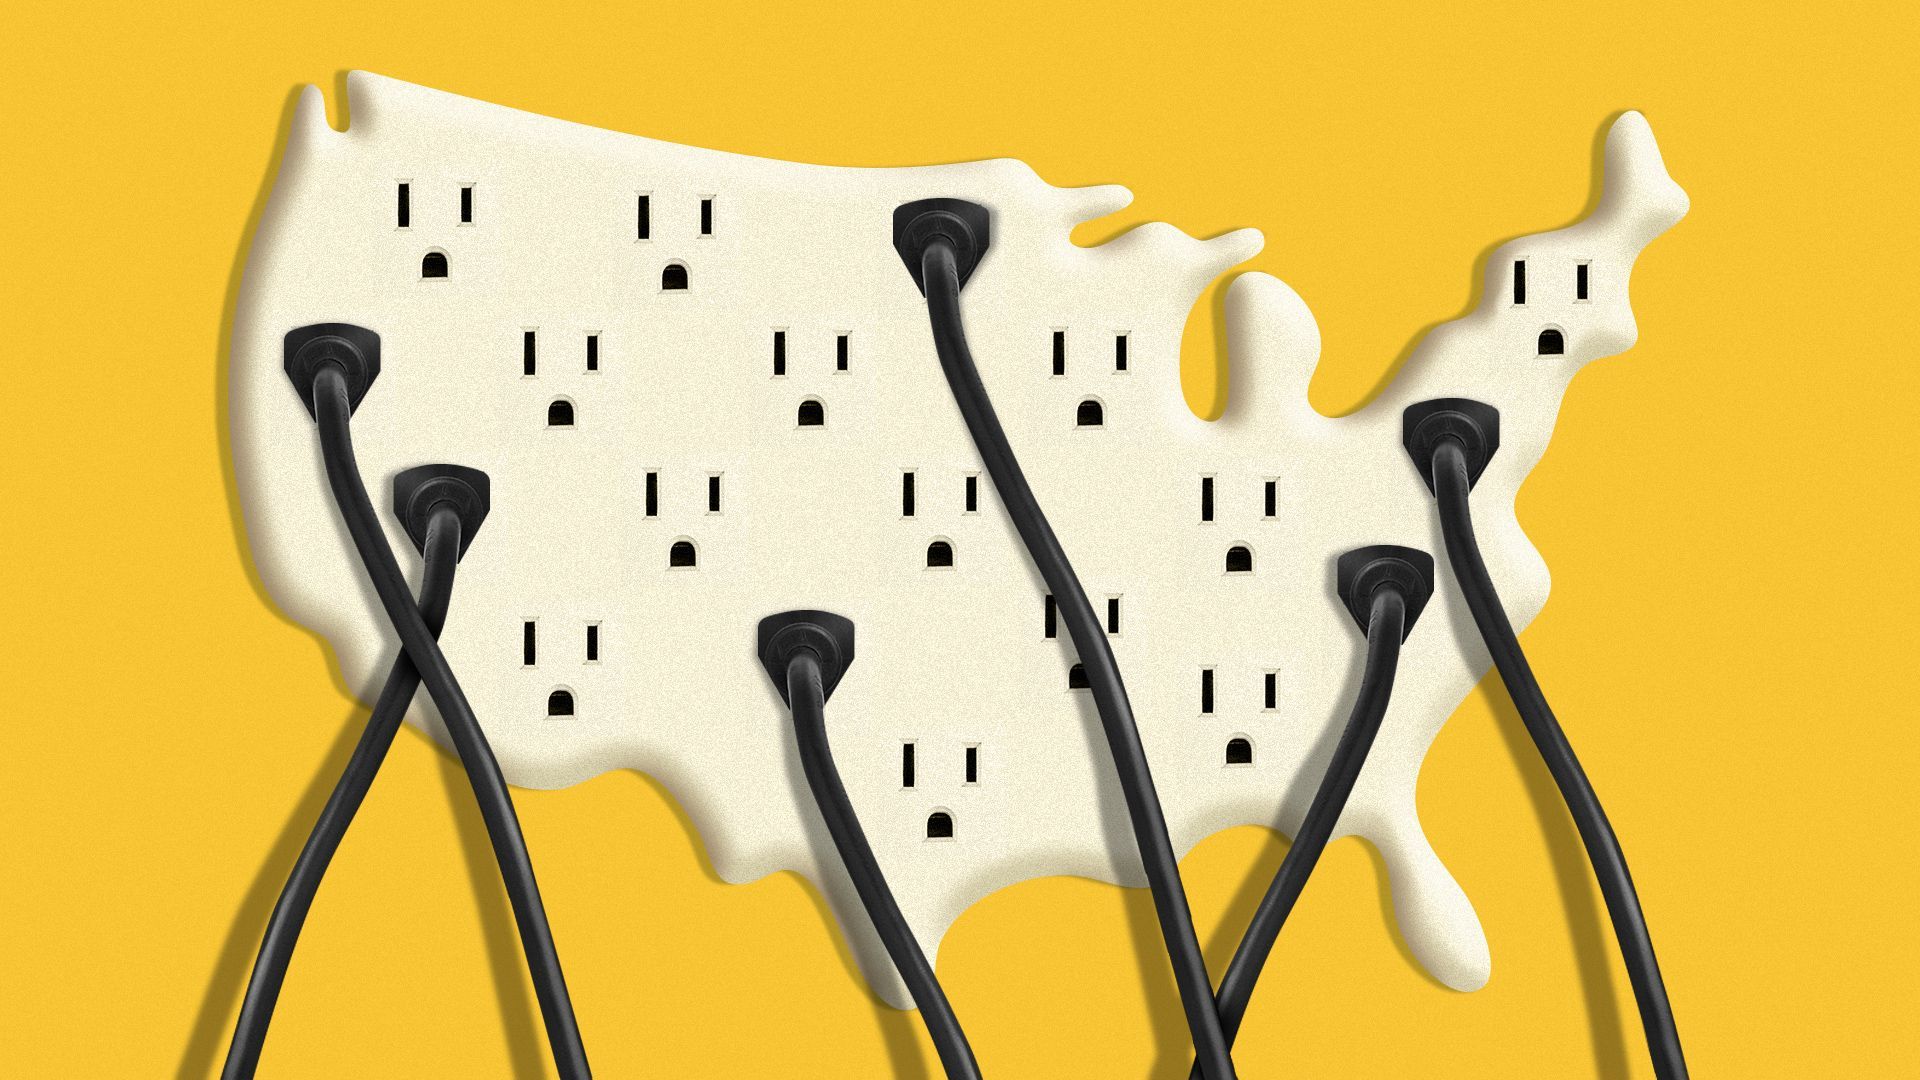 Illustration of America as a power strip with multiple electric sockets across the nation, there are a few plugs in sockets. 